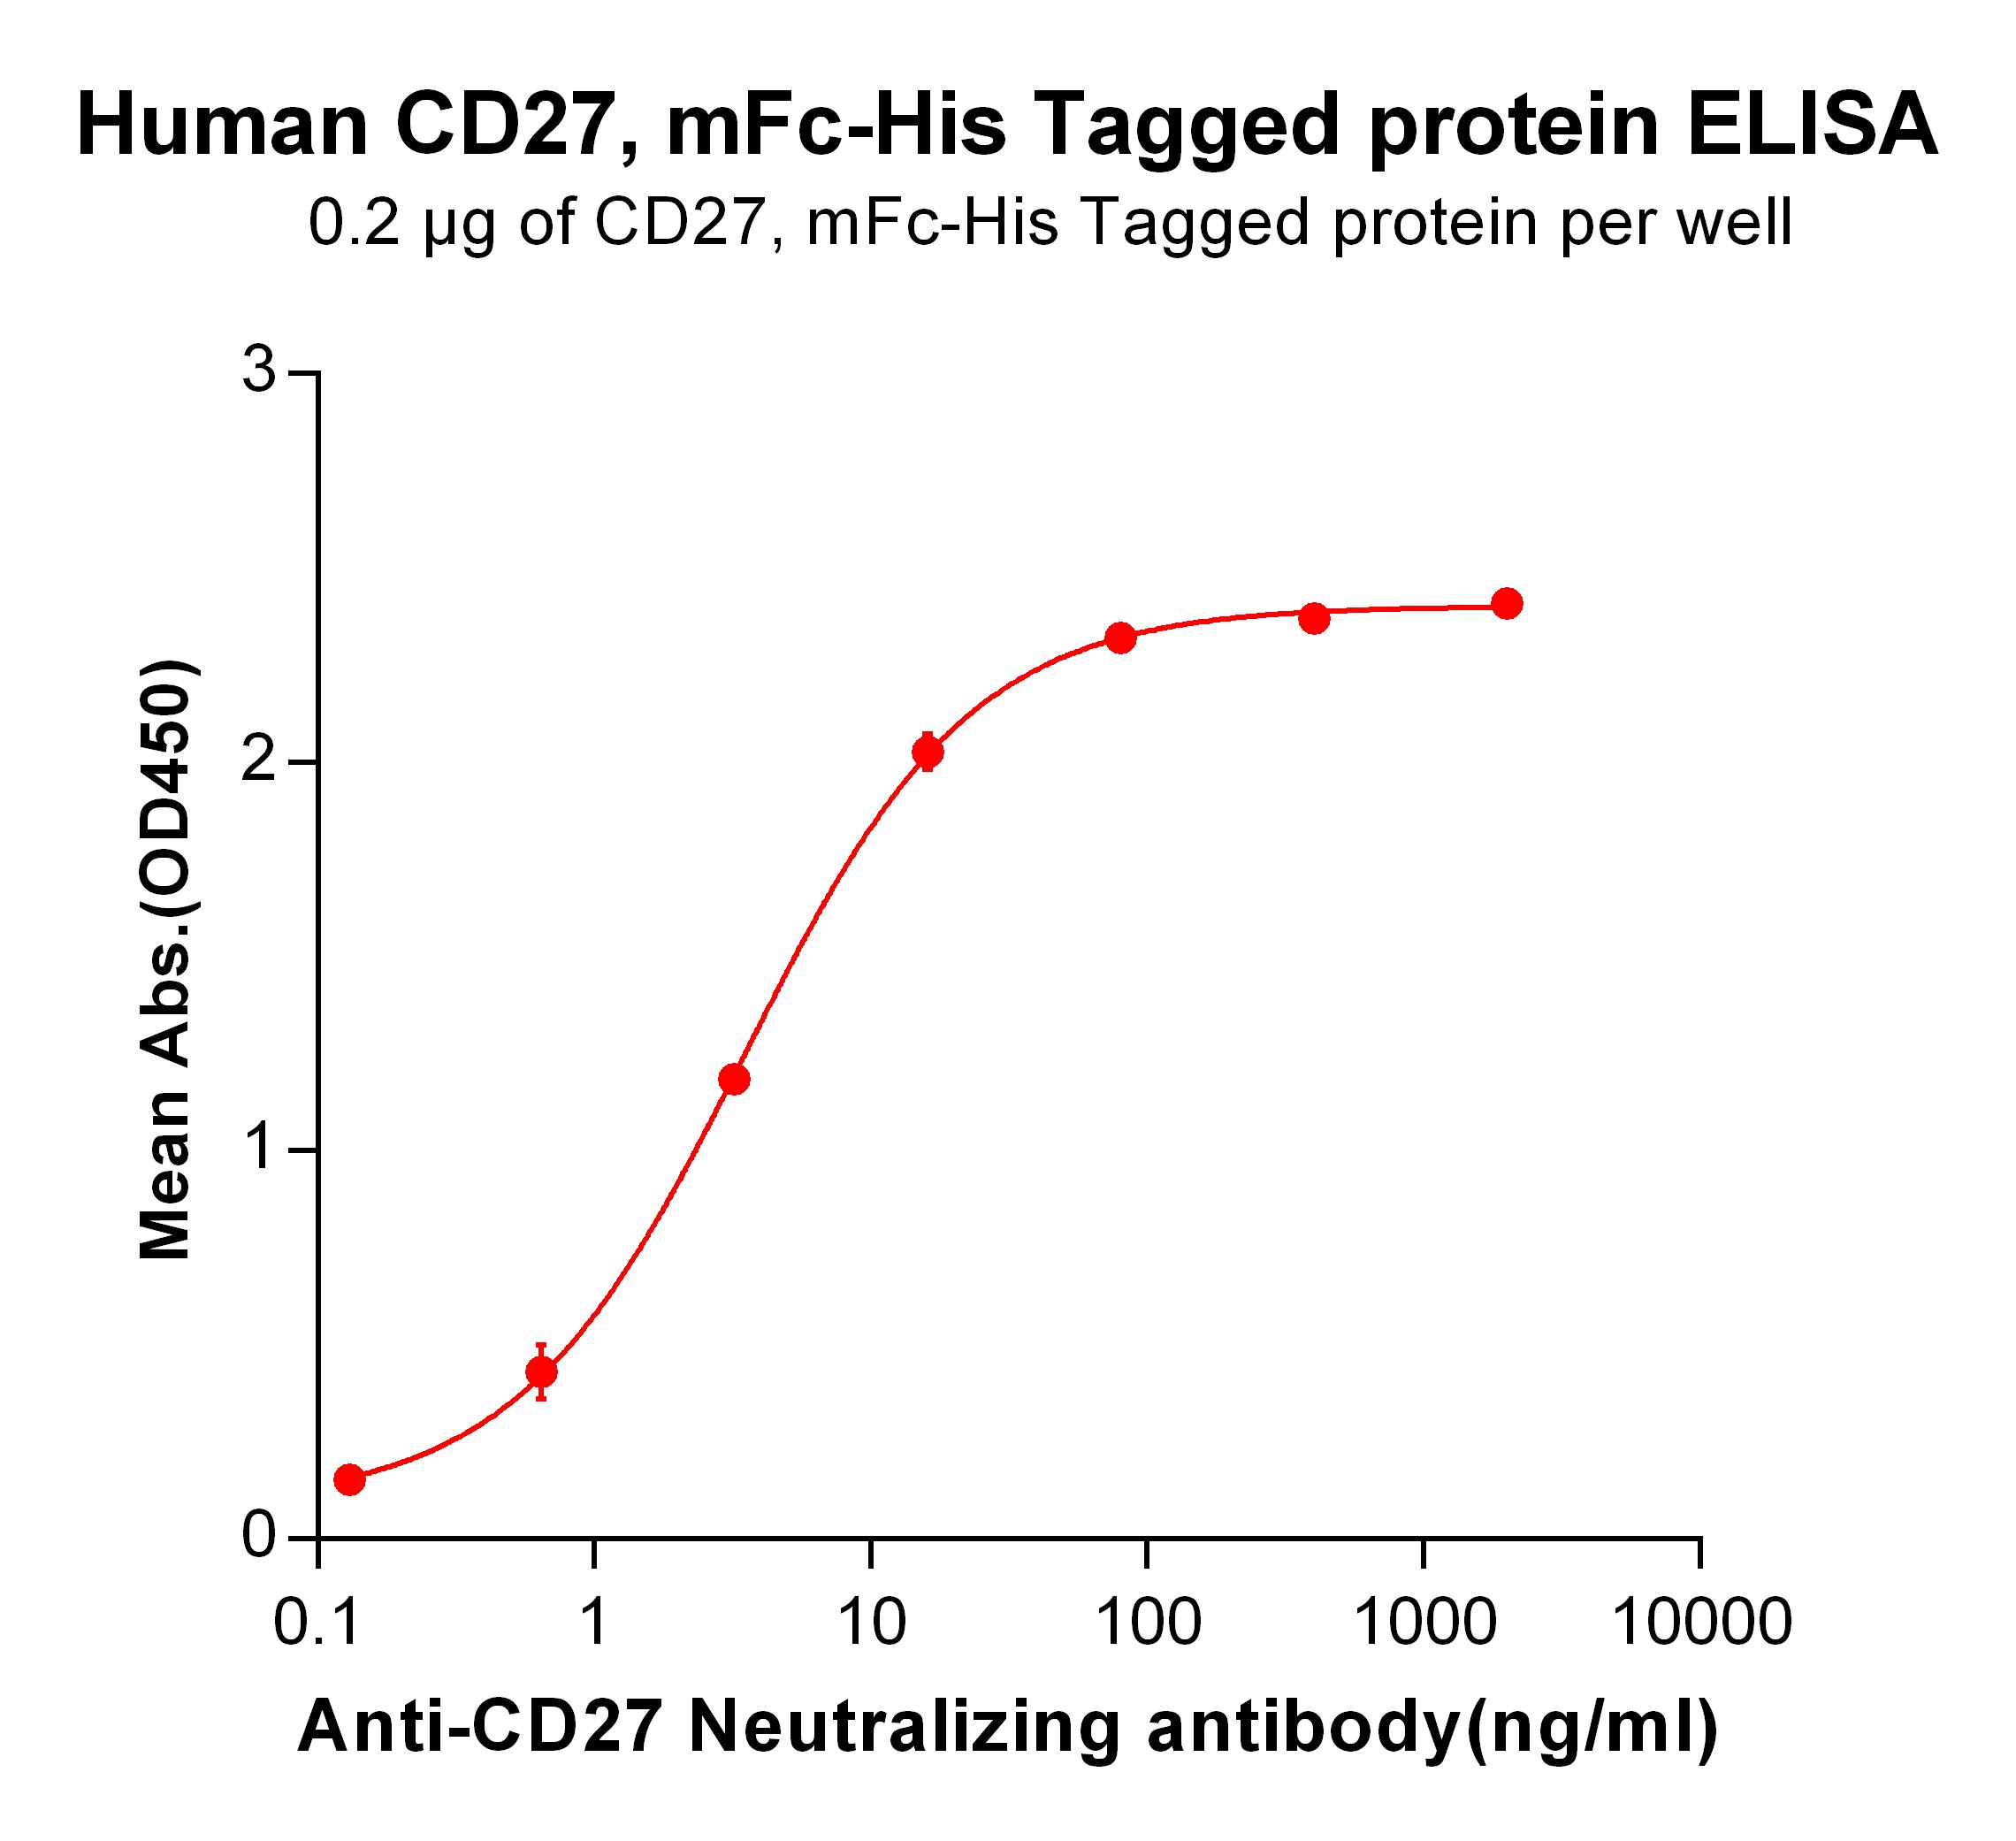 Figure 2. ELISA plate pre-coated by 2 µg/ml (100 µl/well) Human CD27, mFc-His tagged protein  can bind Anti-CD27 Neutralizing antibody  in a linear range of 0.64-16.0 ng/ml.